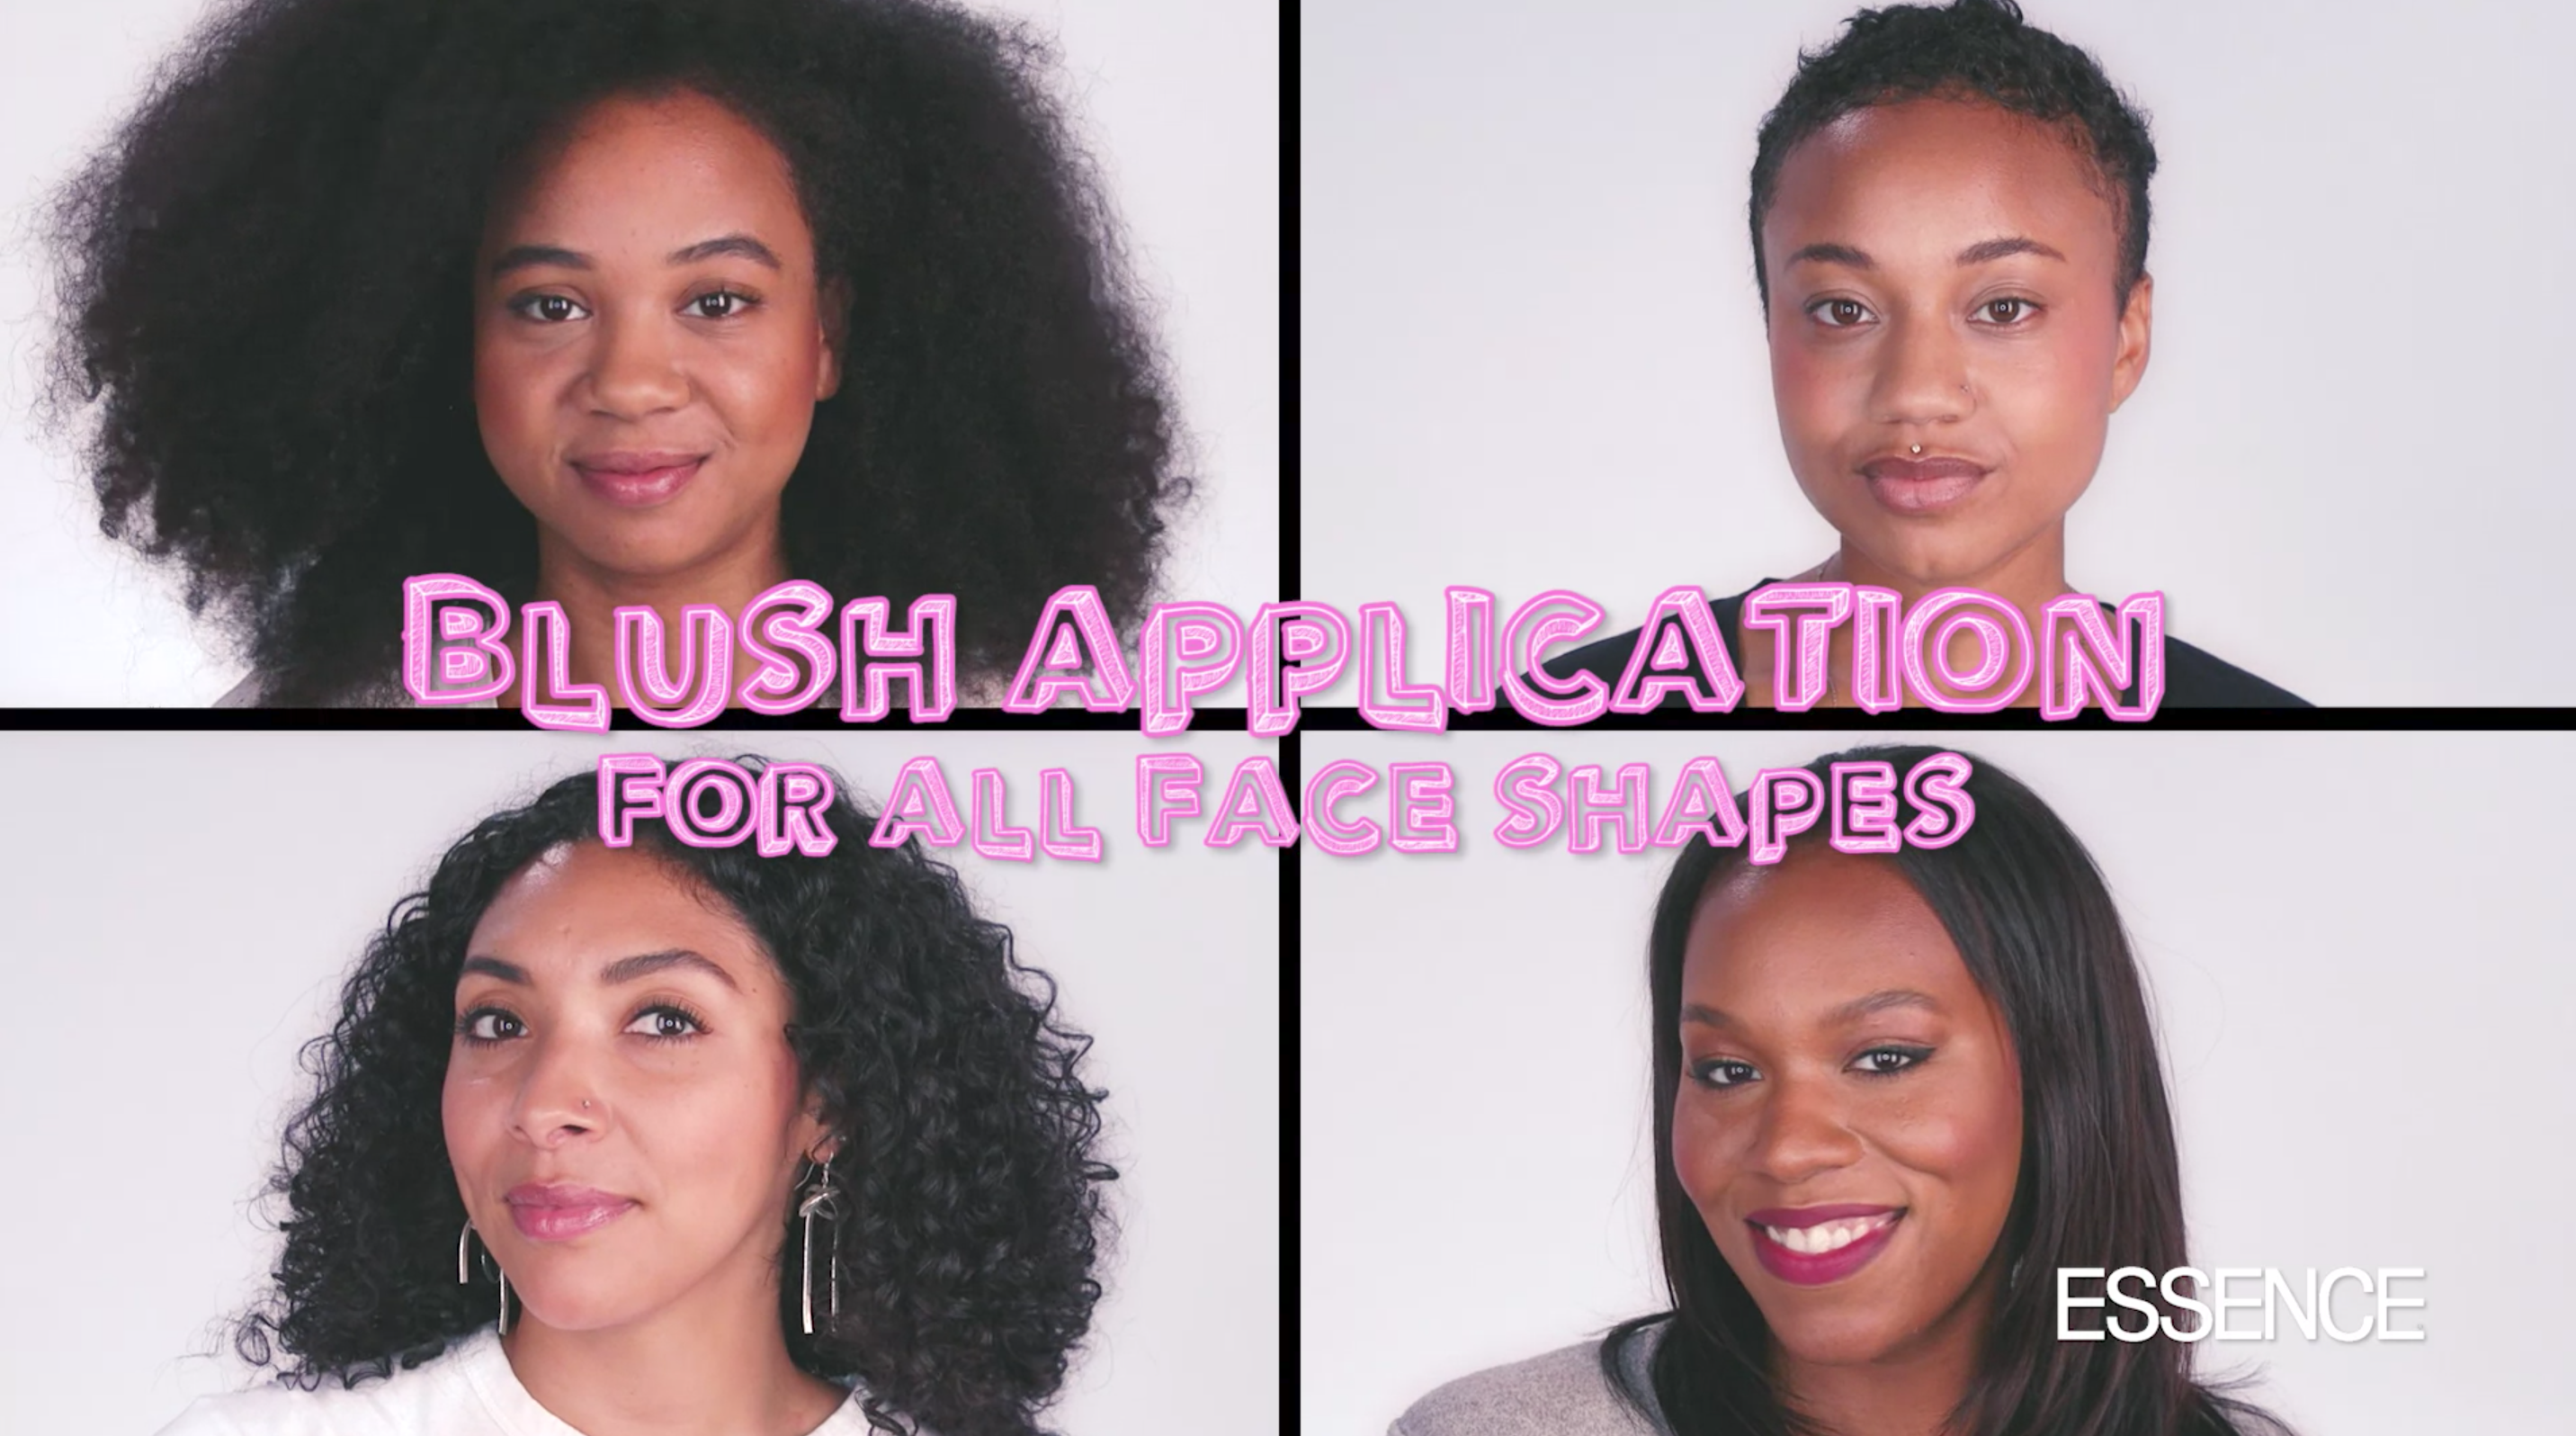 How To Apply Blush For Your Face Shape
